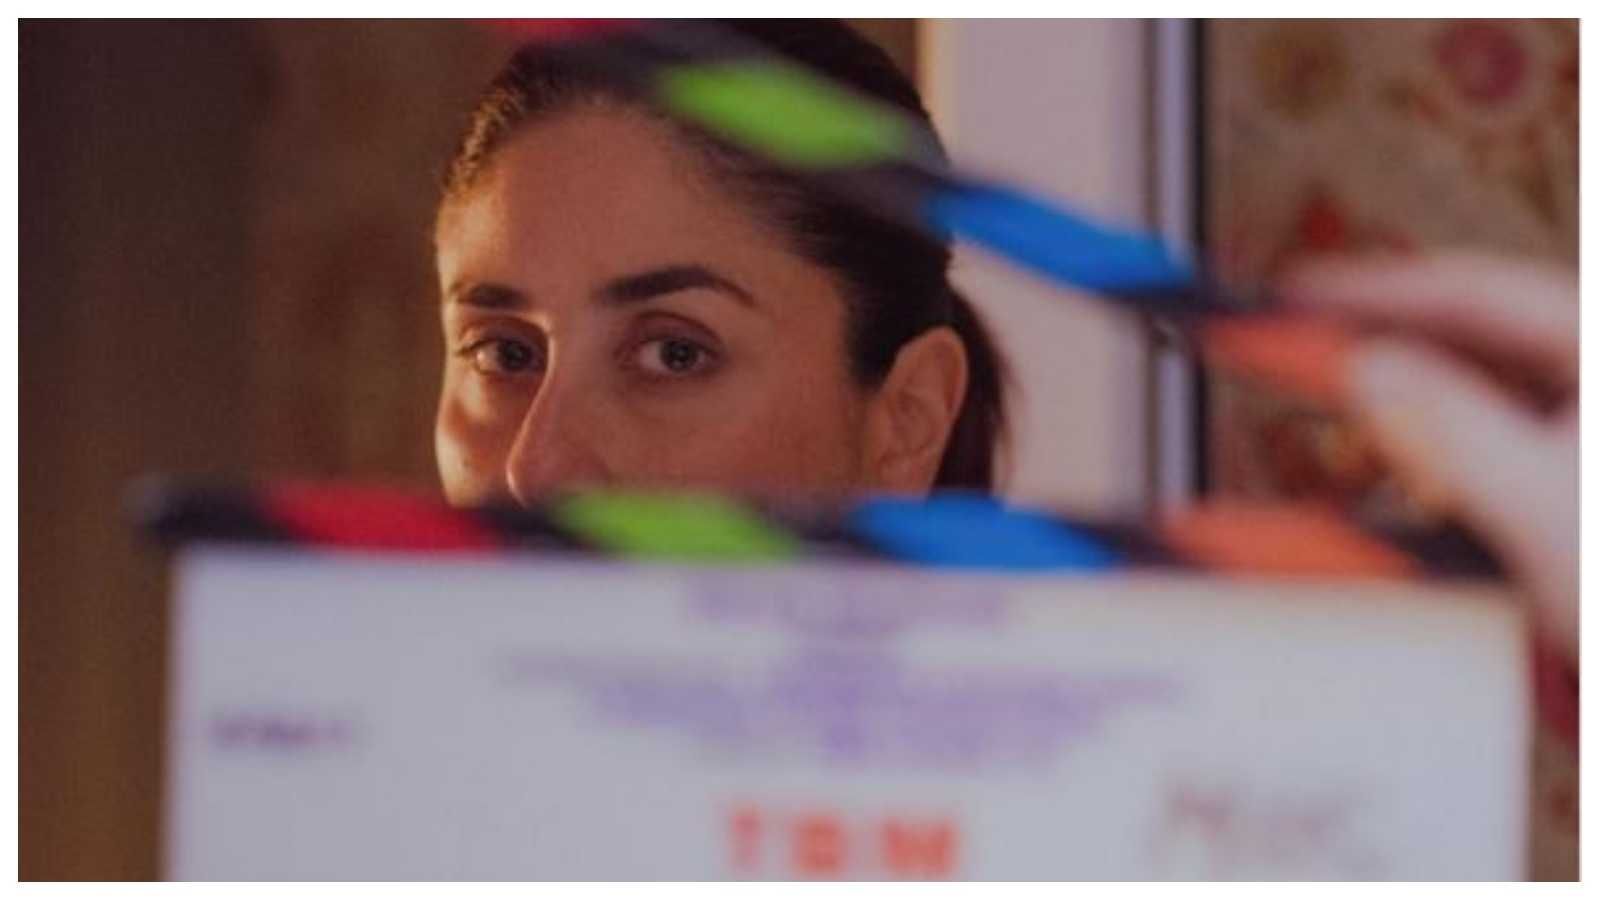 'And Hell ya another...': Kareena Kapoor Khan marks 23 years in film industry with BTS shoot from The Buckingham Murder